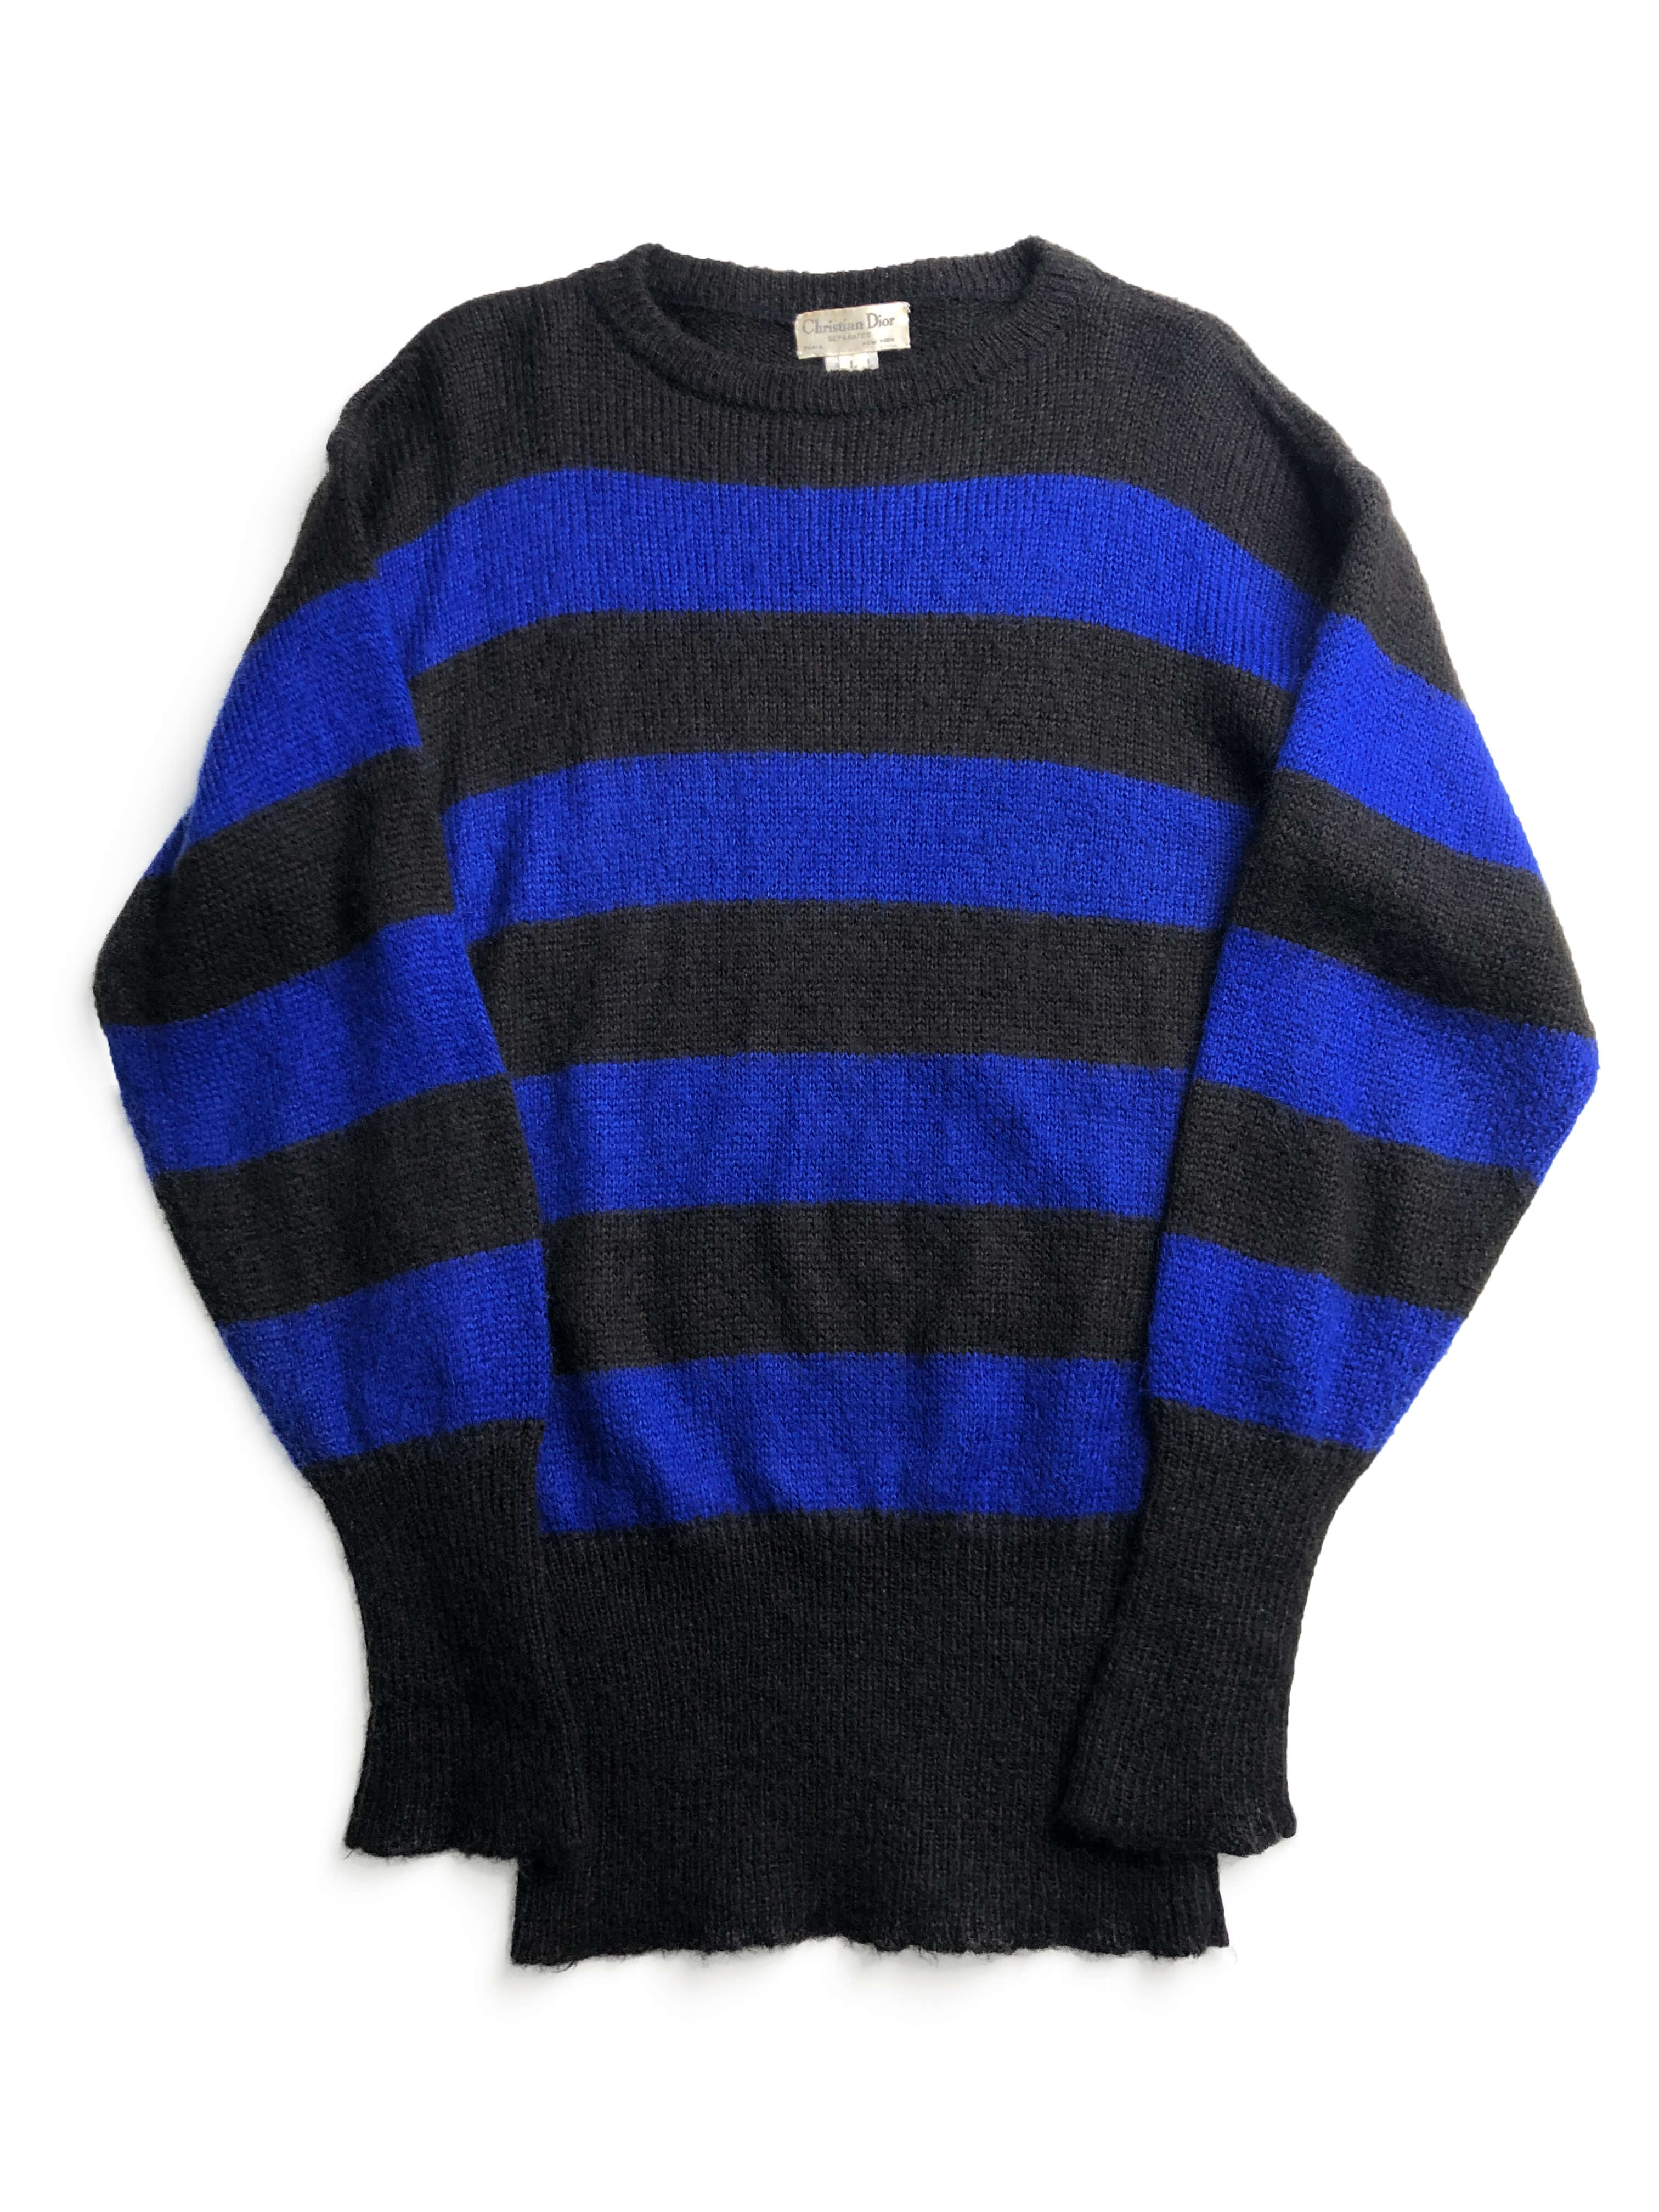 Christian Dior SEPARATES 80s mohair sweater